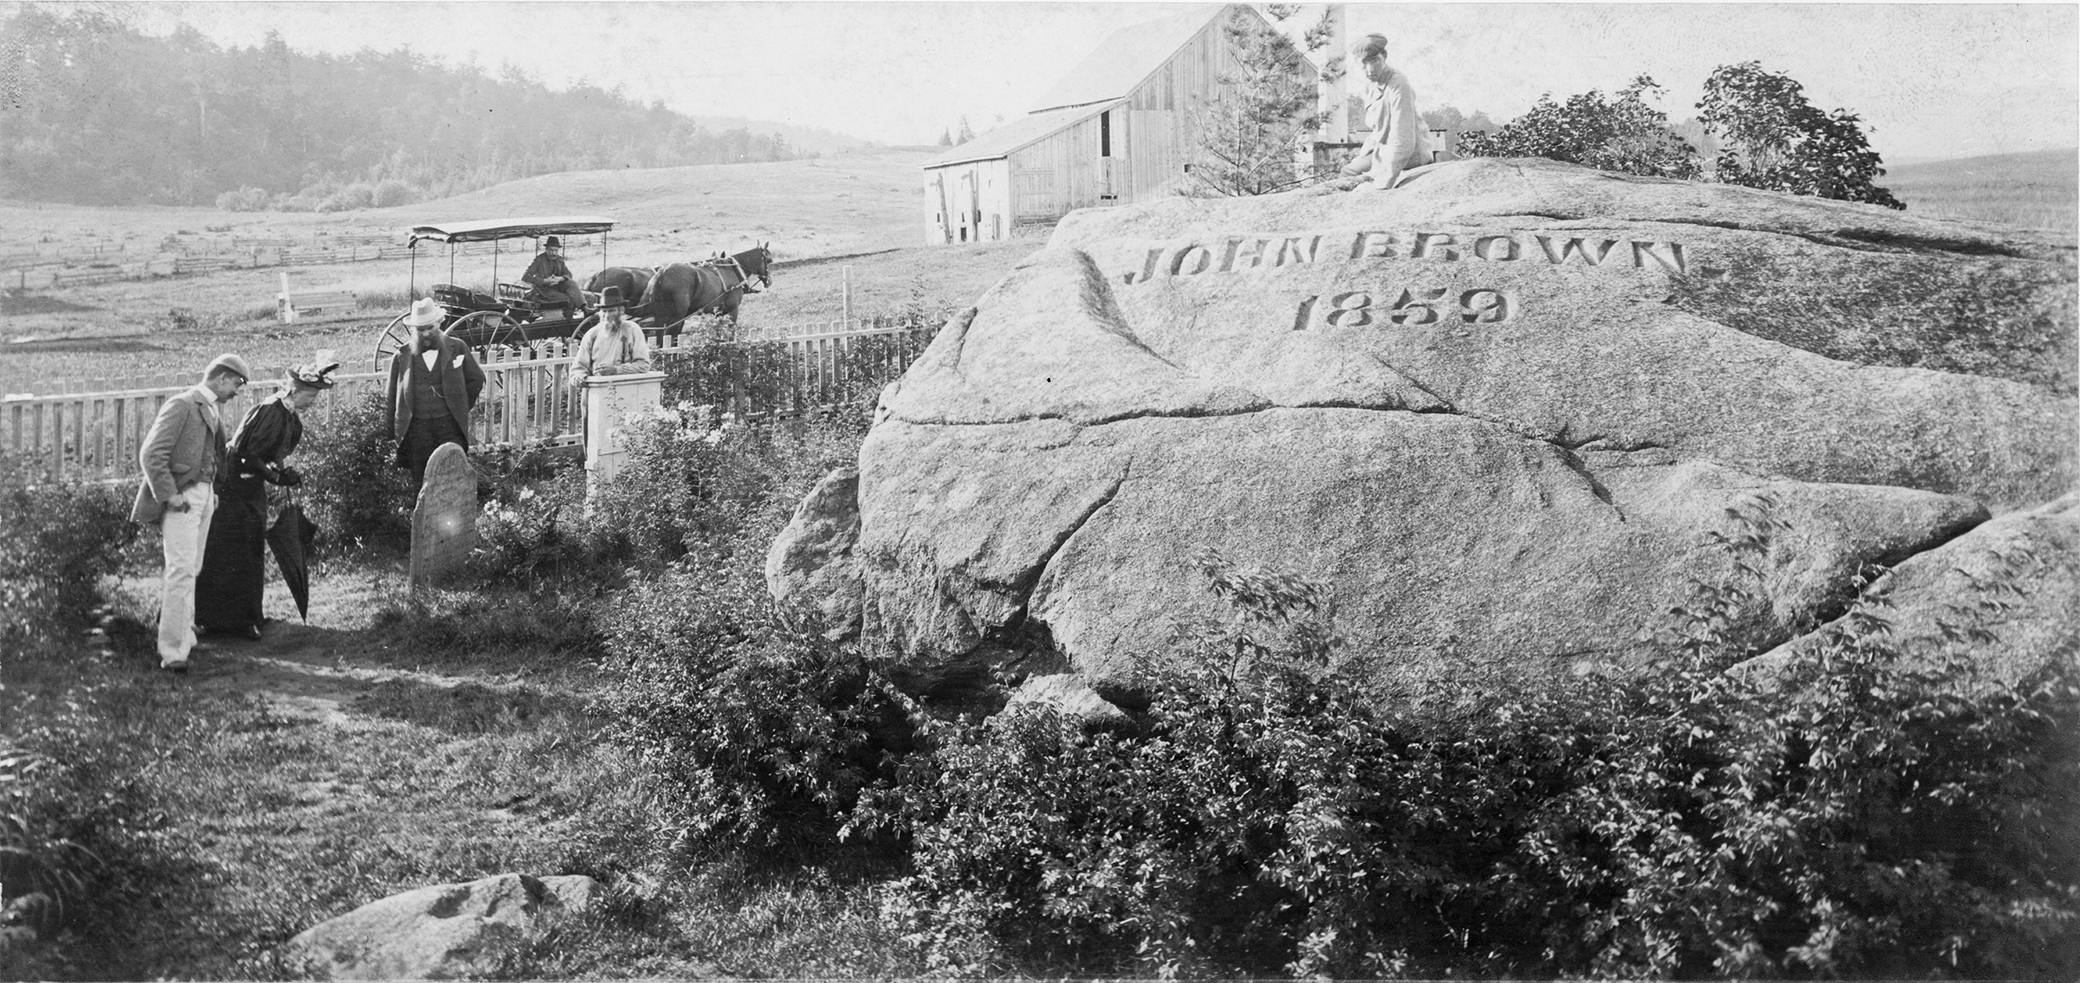 John Brown’s grave and the “Big Rock,” North Elba, New York, c. 1896. Photograph by Seneca Ray Stoddard. Library of Congress, Prints and Photographs Division.